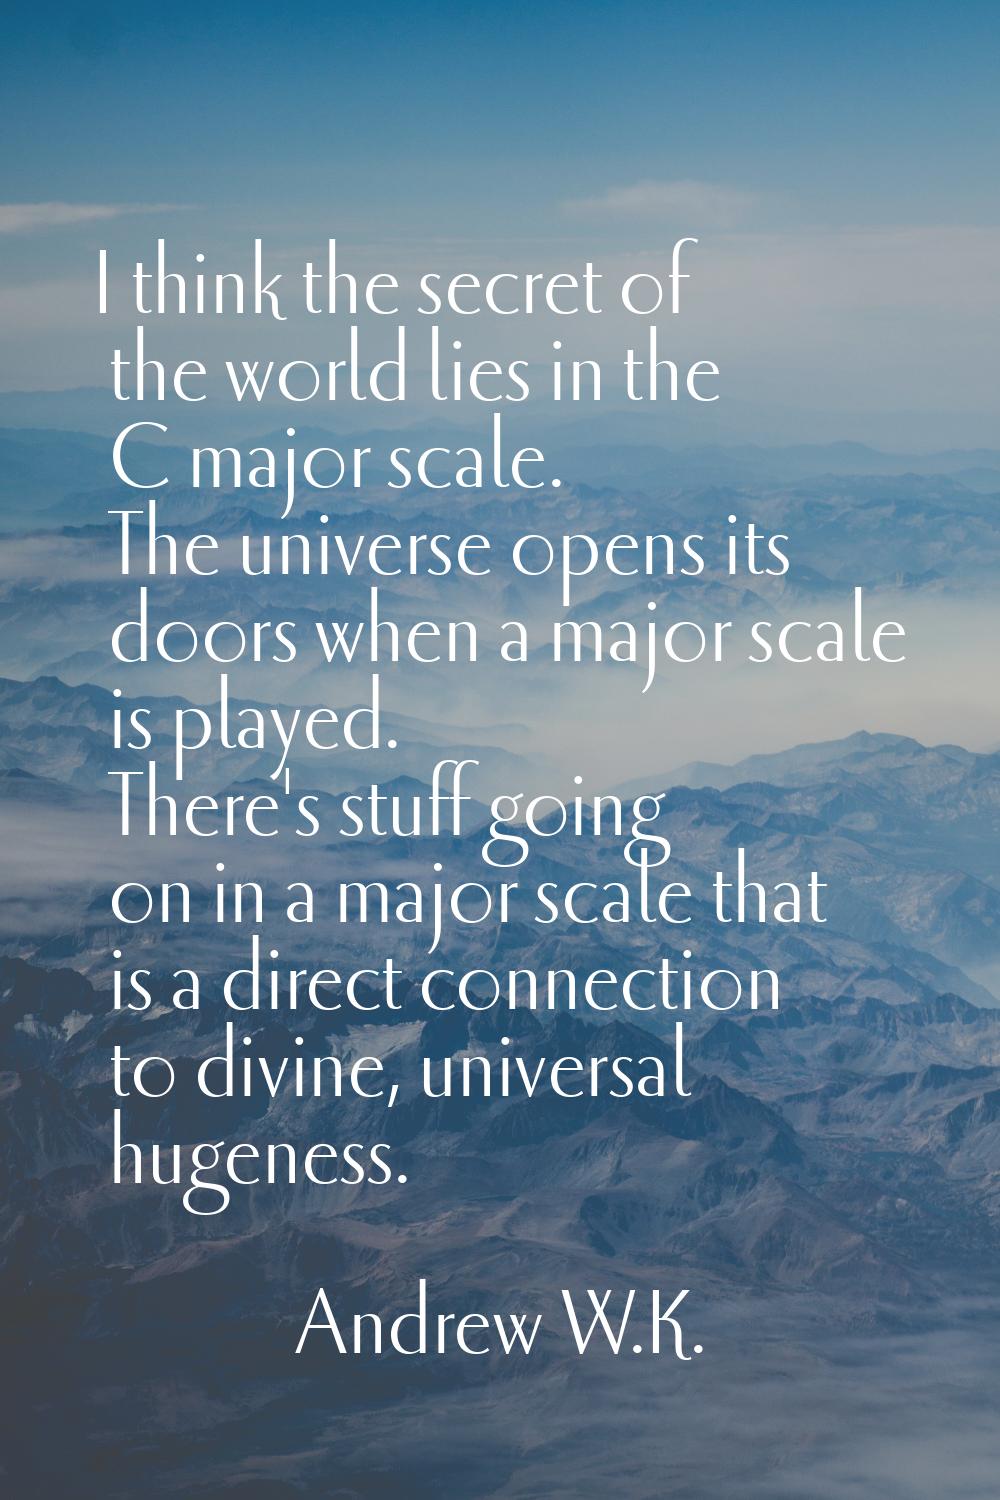 I think the secret of the world lies in the C major scale. The universe opens its doors when a majo